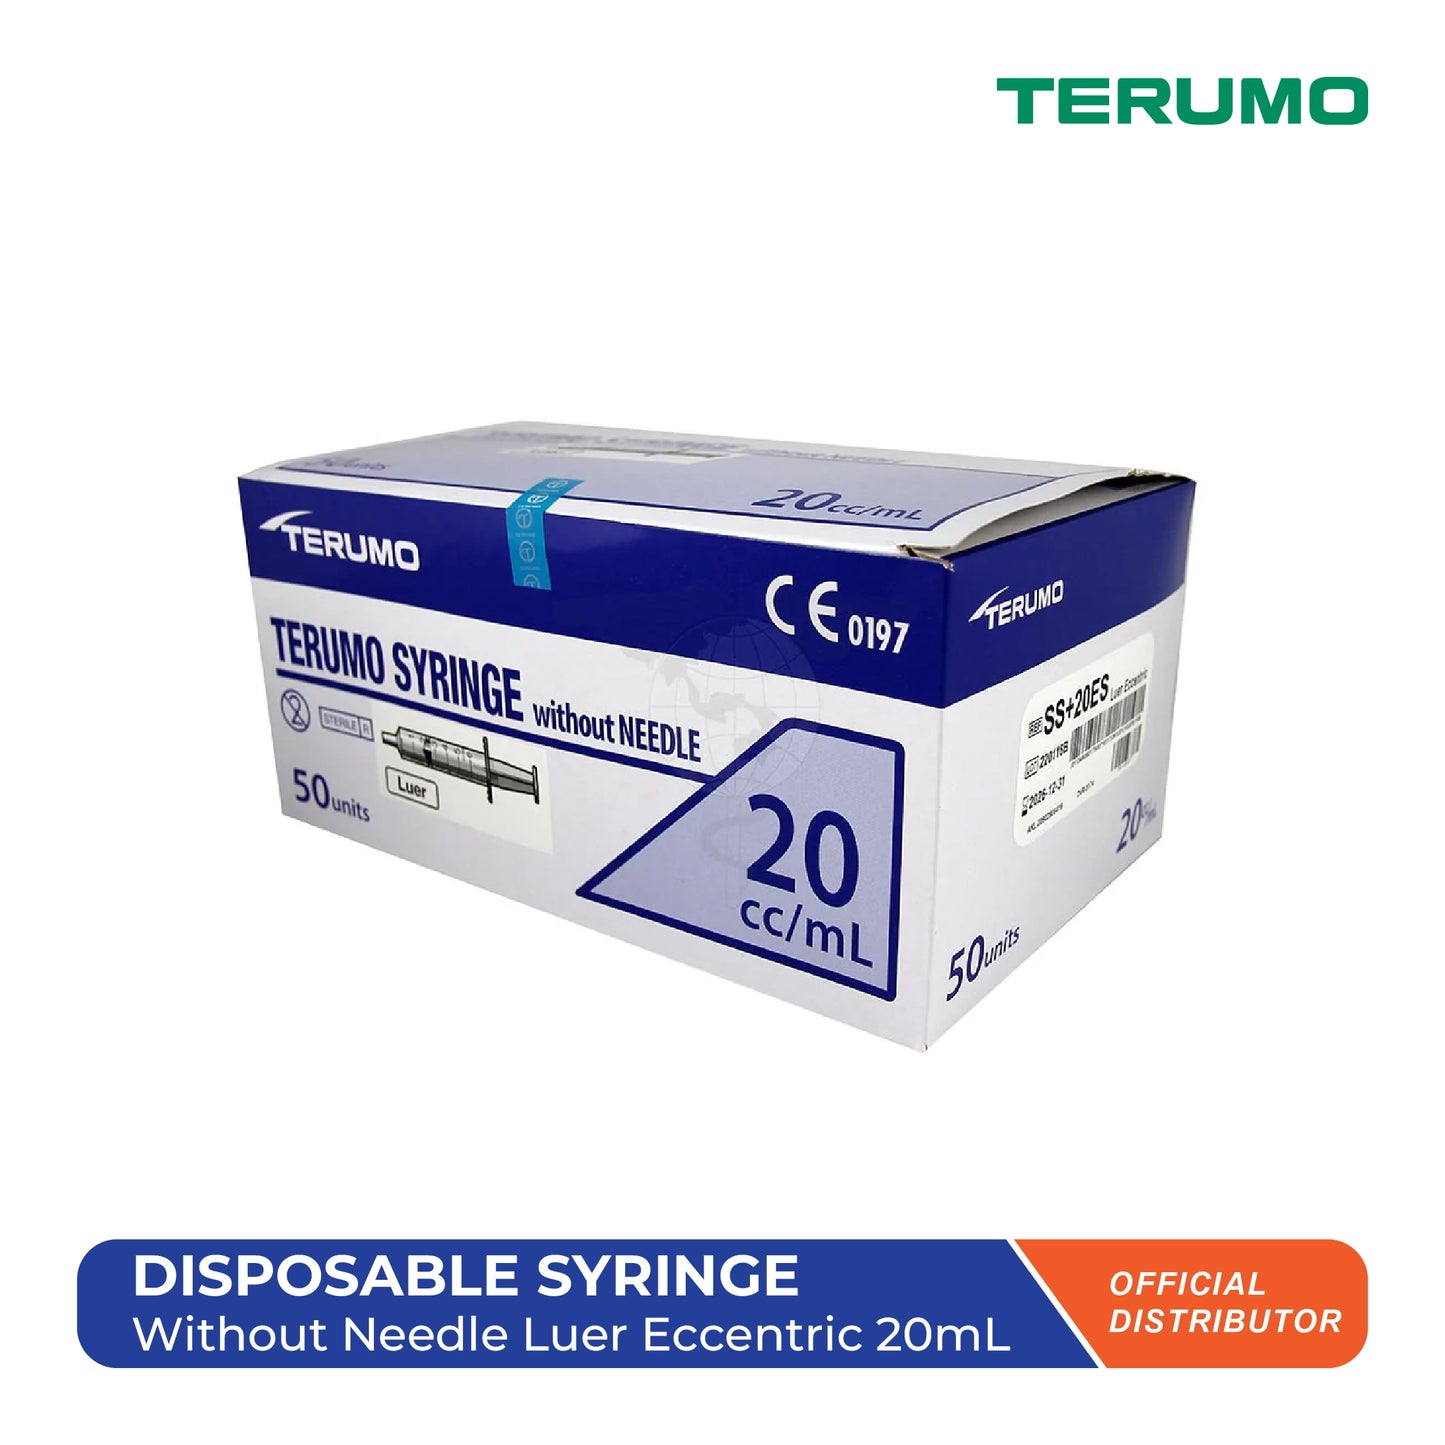 Disposable Syringe Without Needle Luer Eccentric 20ml